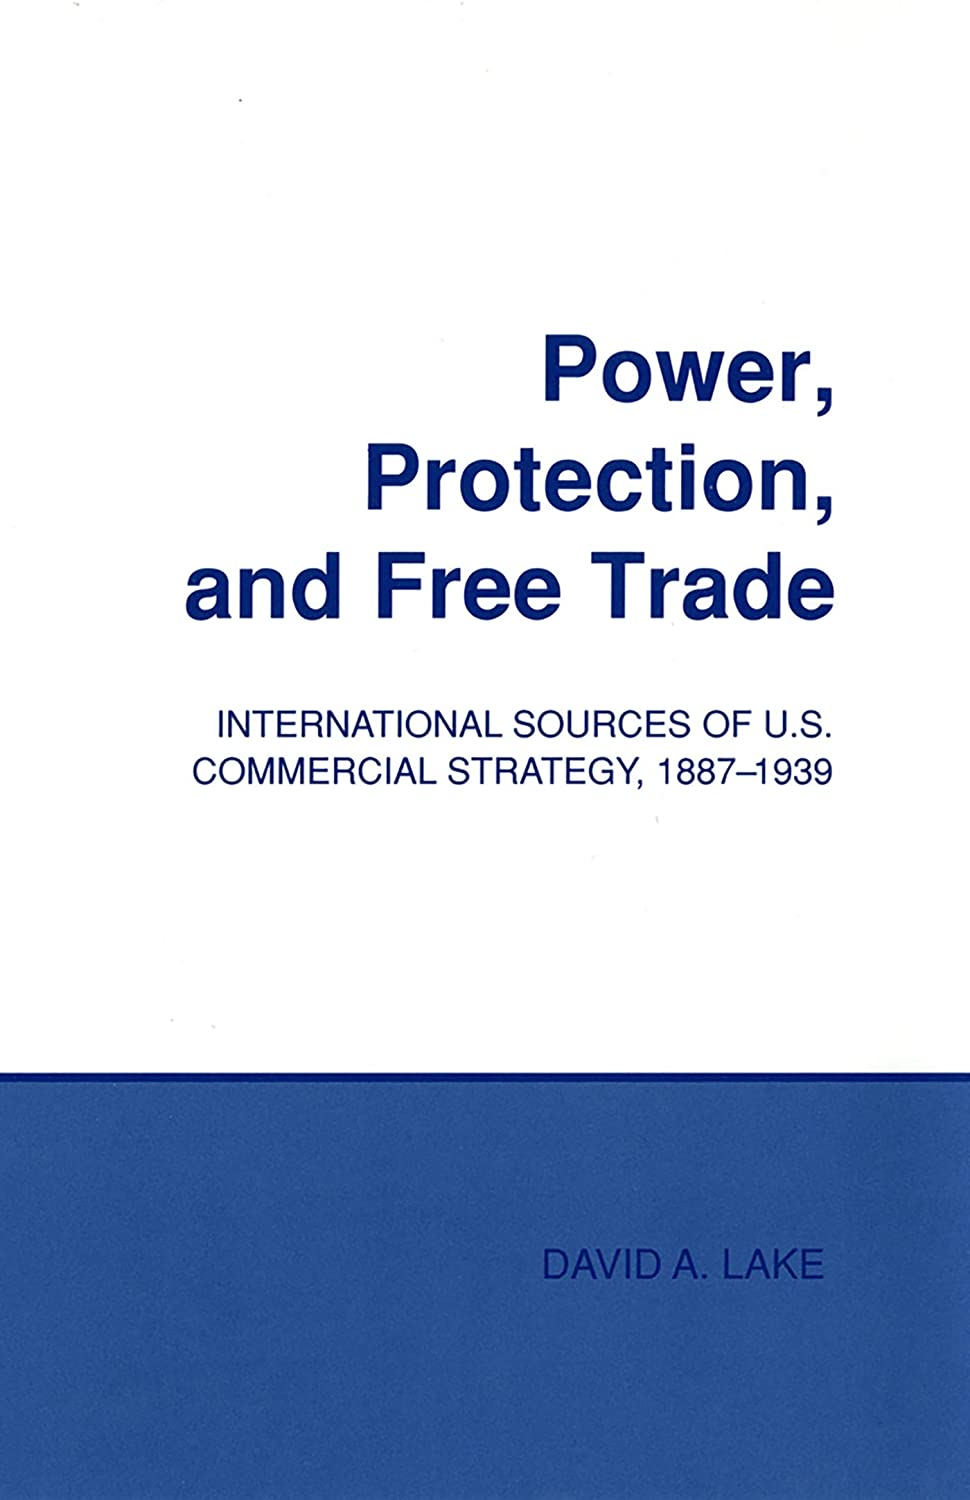 Power, Protection, and Free Trade: International Sources of U.S. Commercial Strategy, 1887&ndash;1939 (Cornell Studies in Political Economy)